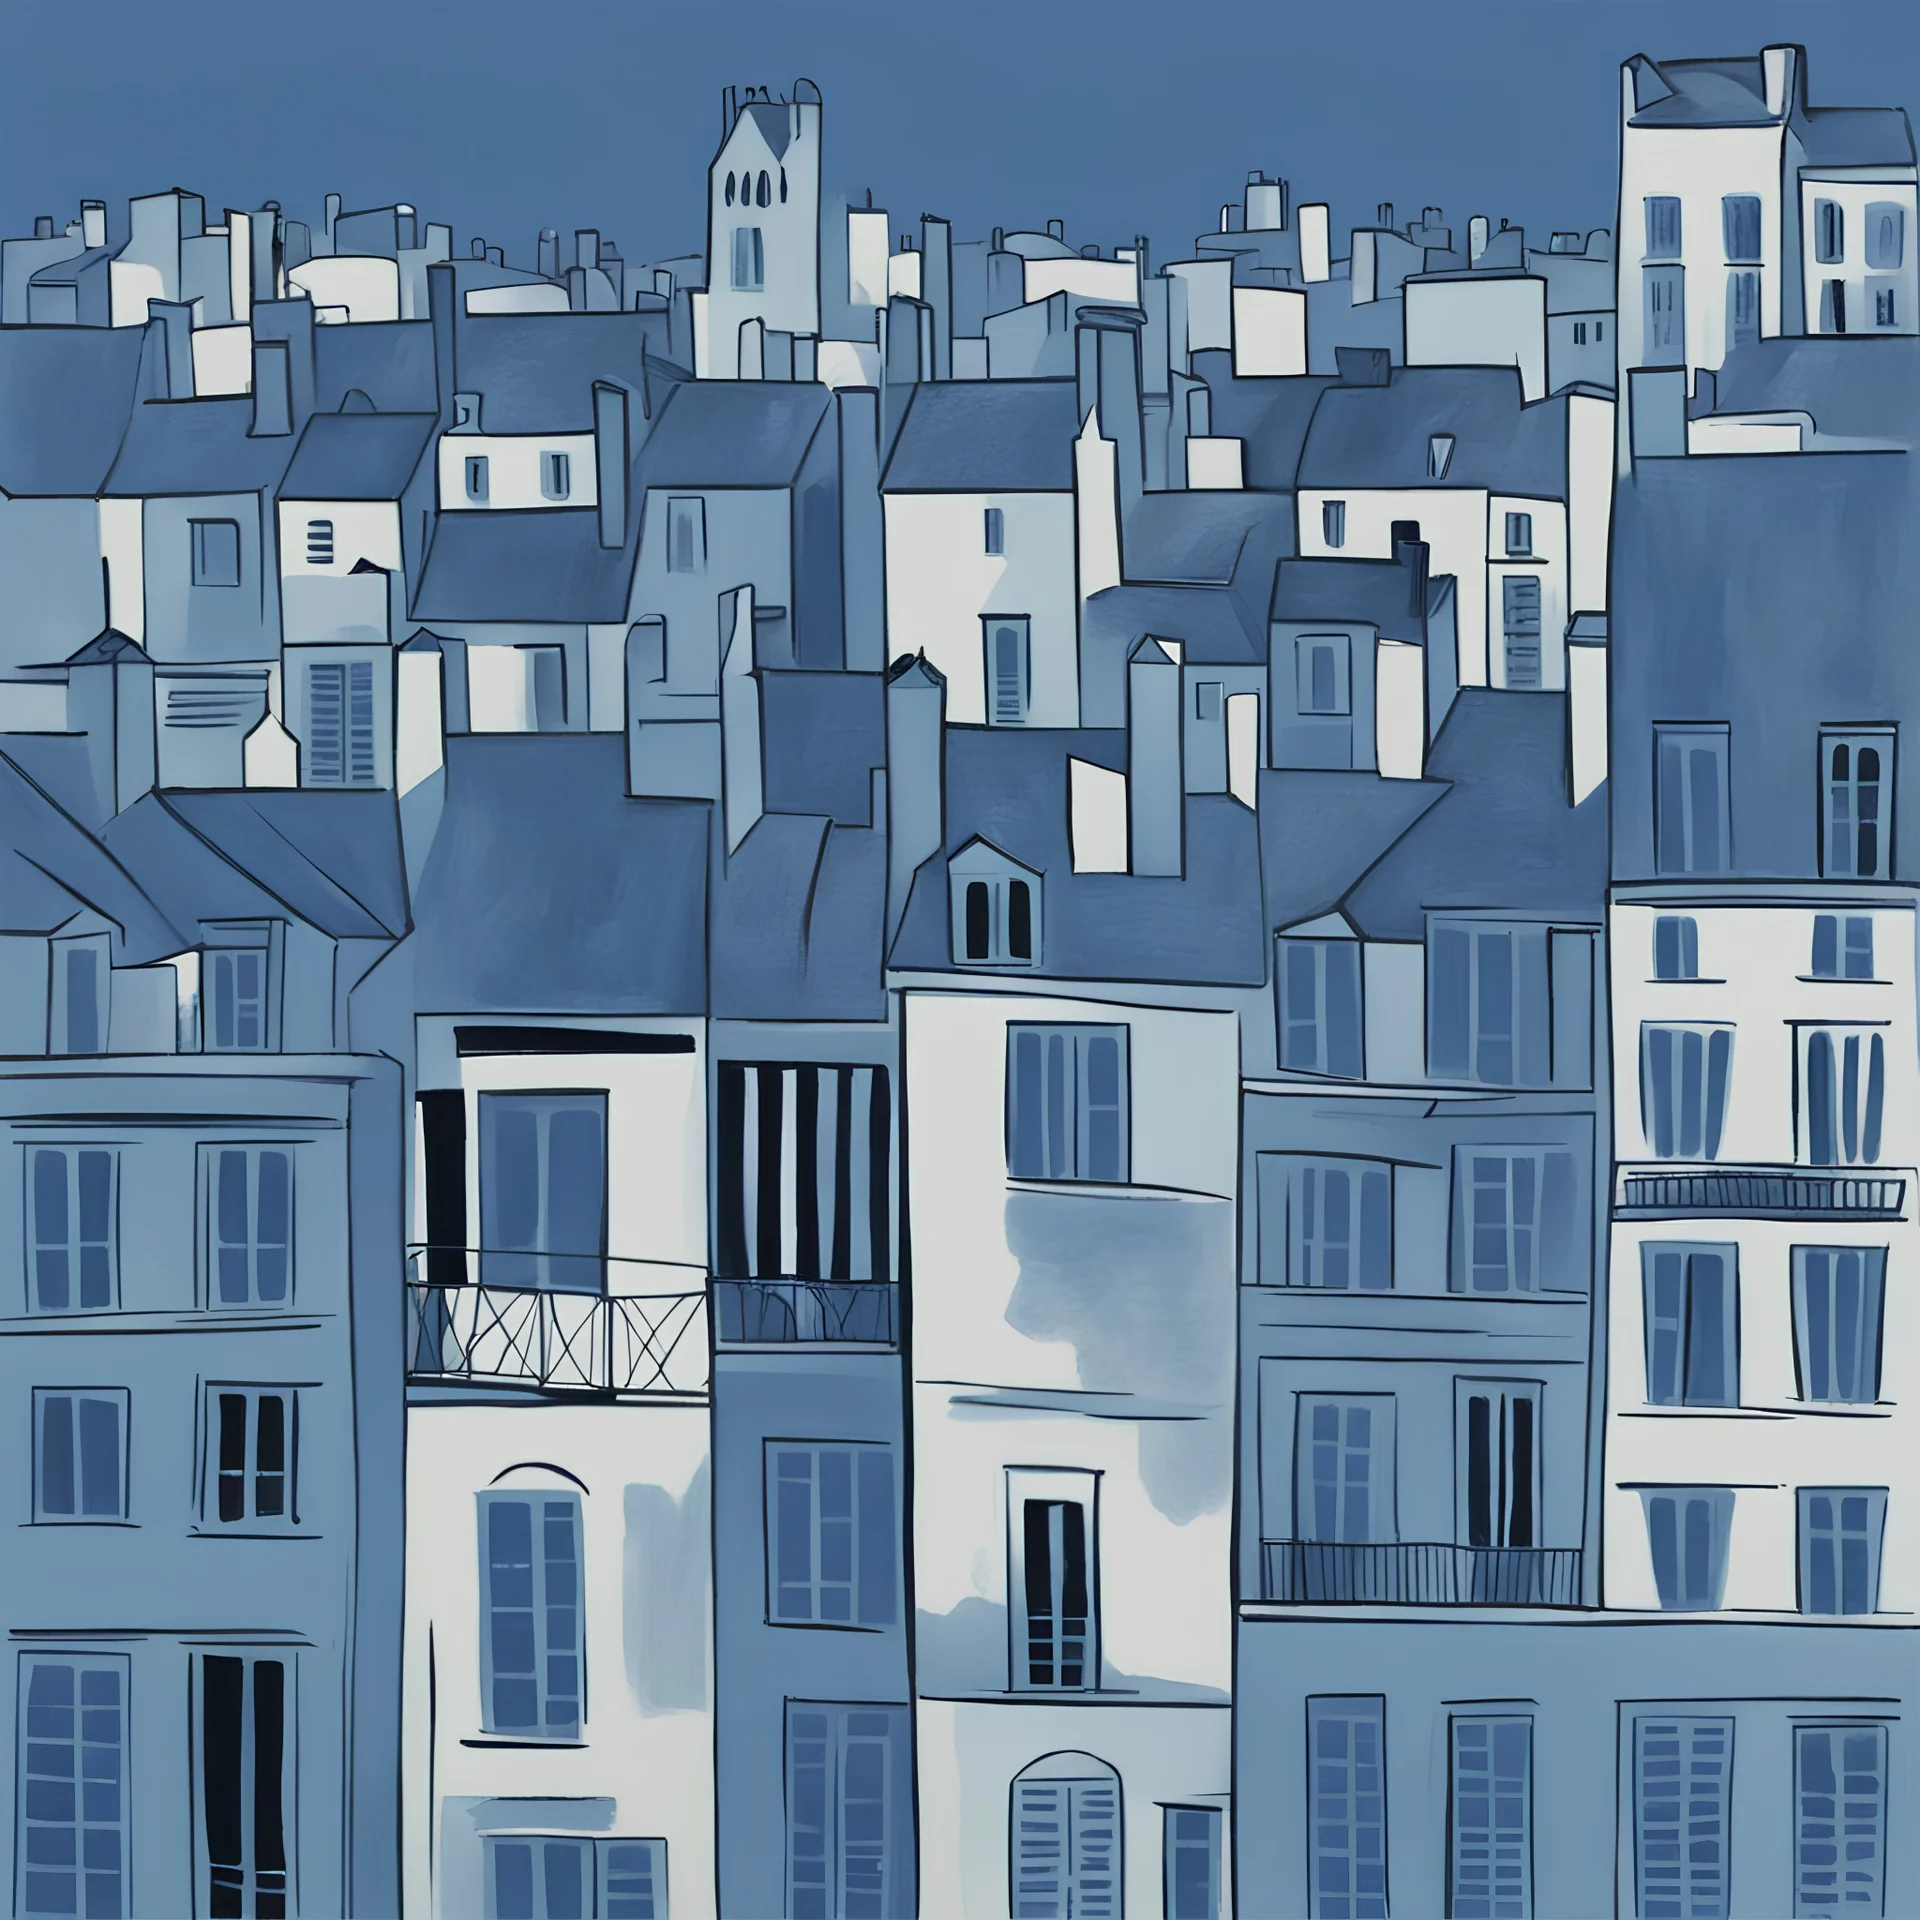 Paris painted by Pablo Picasso in the blue period